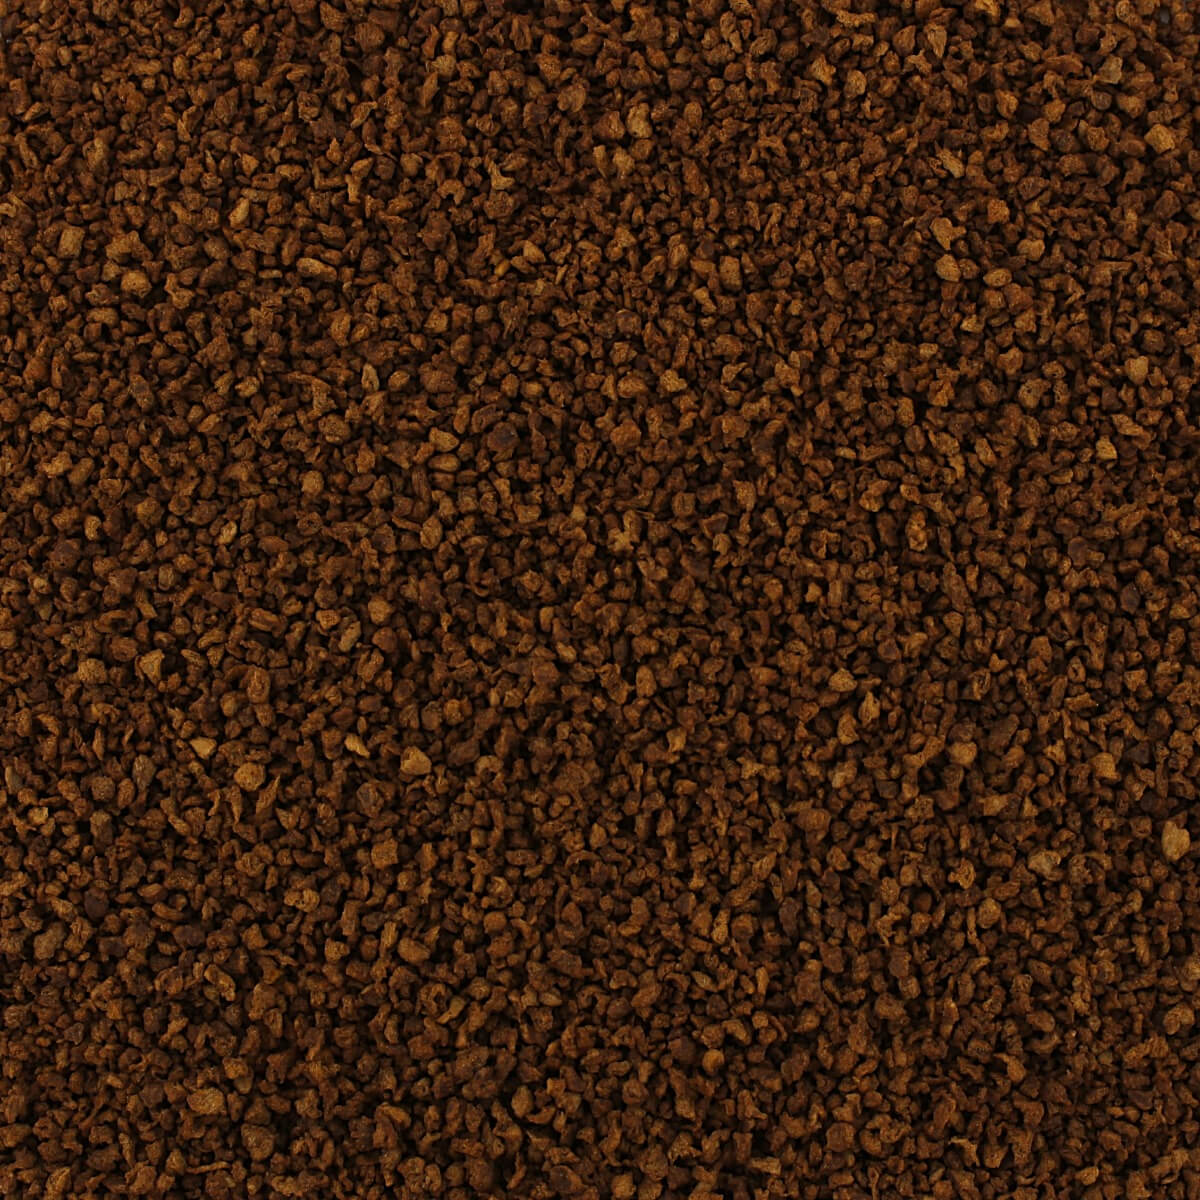 A close up image of a brown sand texture. (Sand, texture)